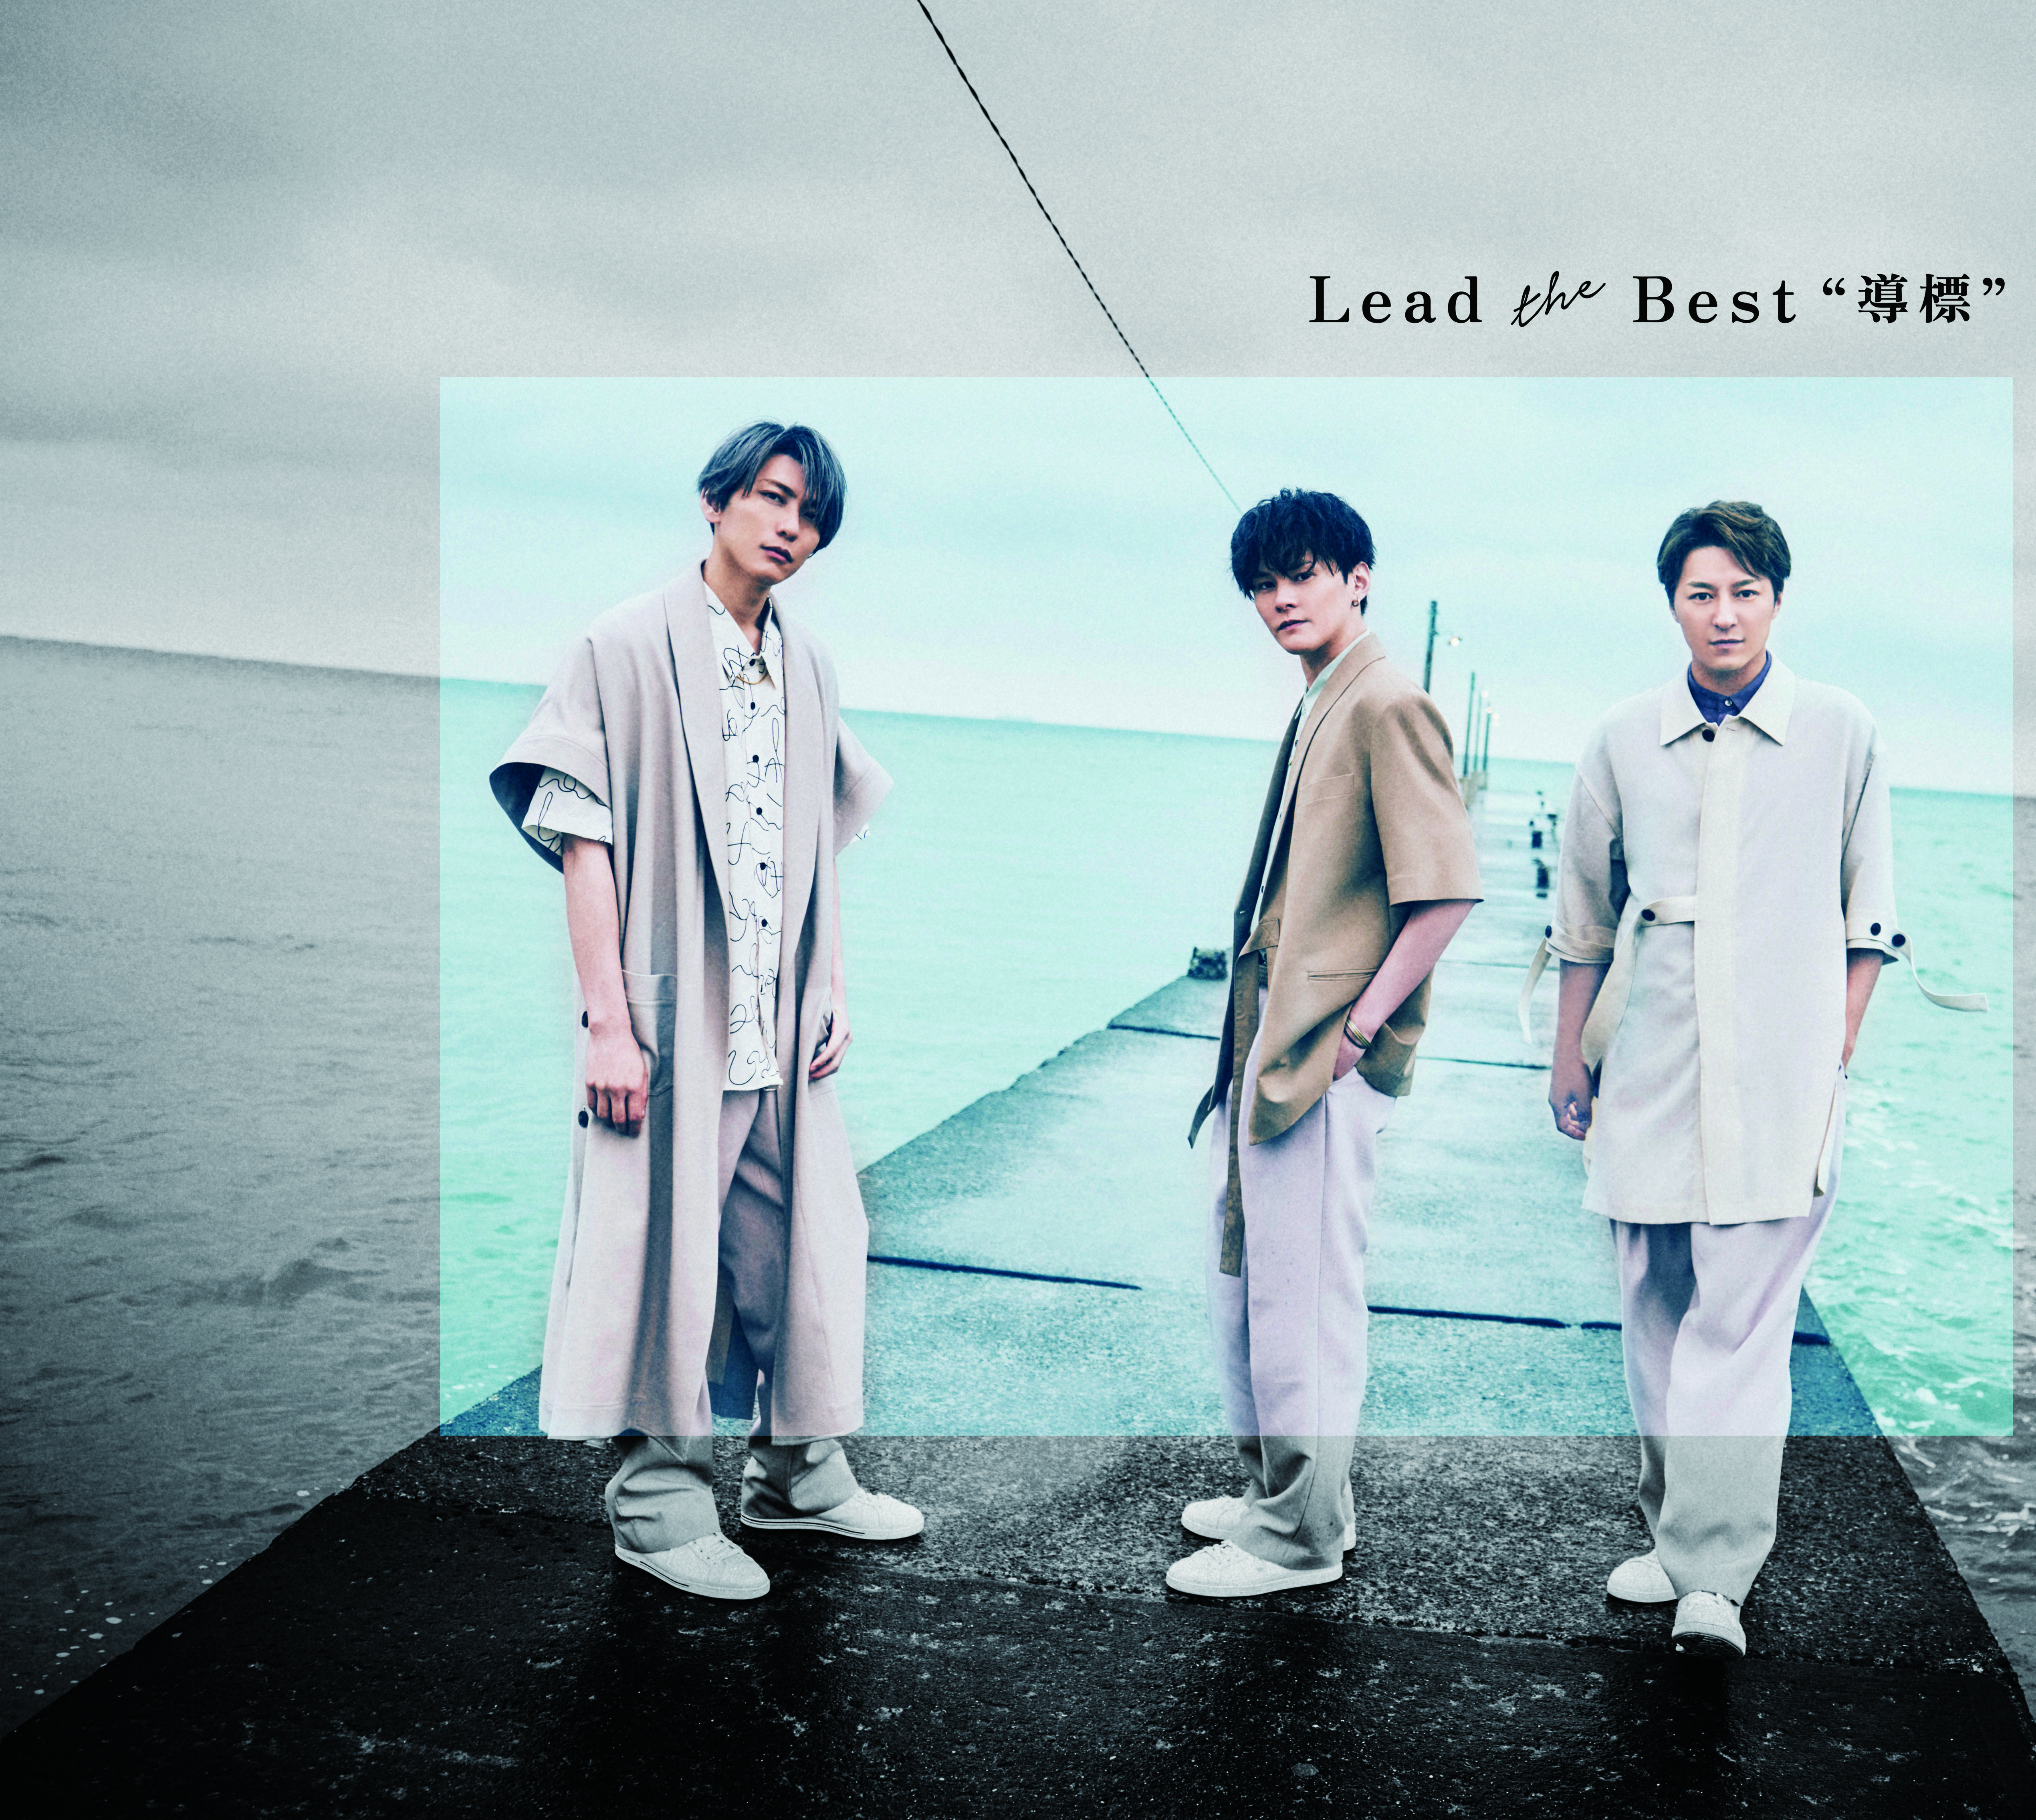 Lead the Best "Michishirube" Normal Edition (3CD) Release on July 31st,2022 No.1